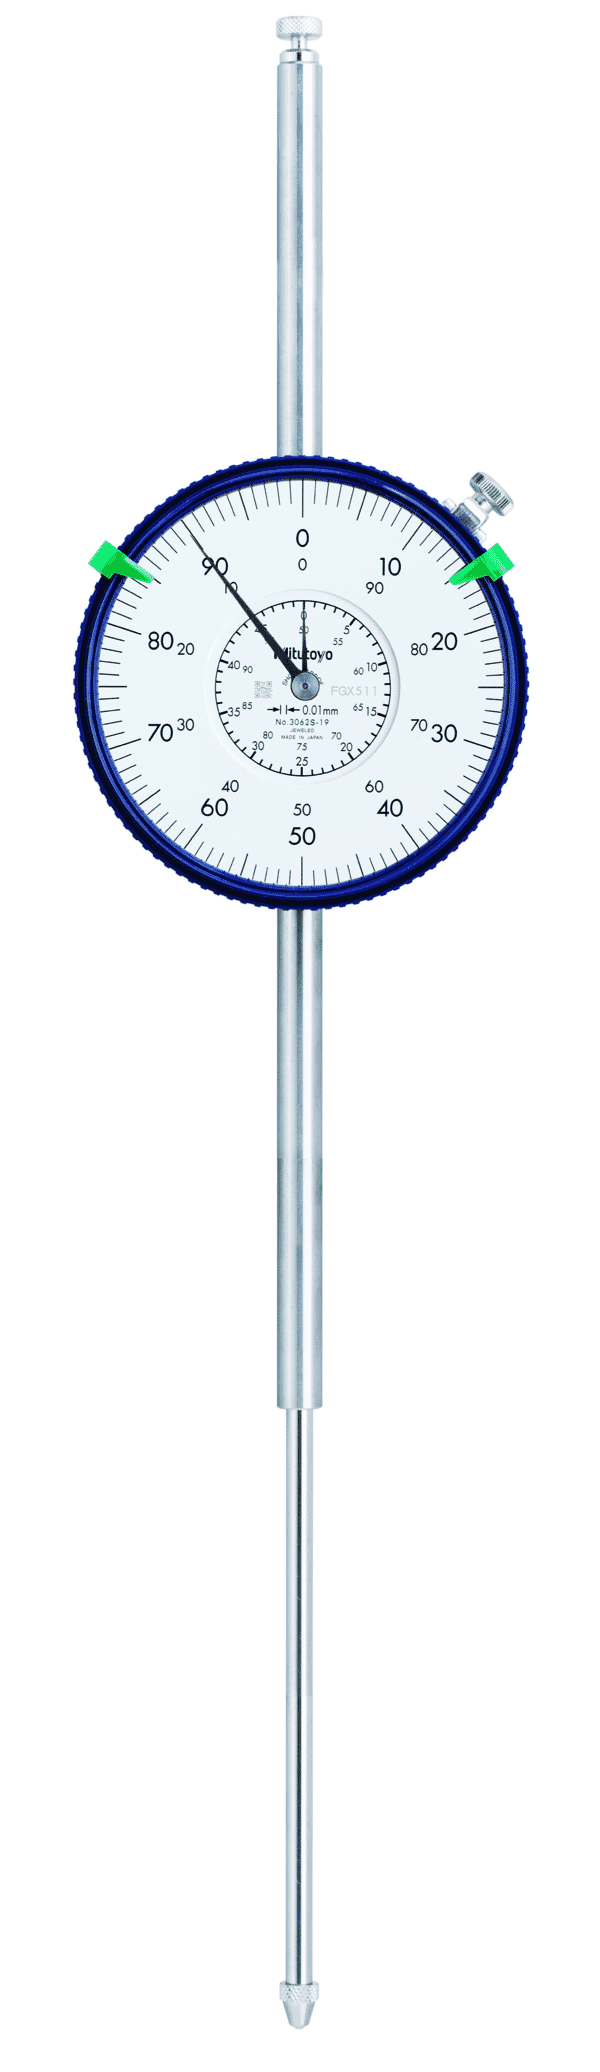 Mitutoyo Dial Indicator 100Mm X 0.01Mm